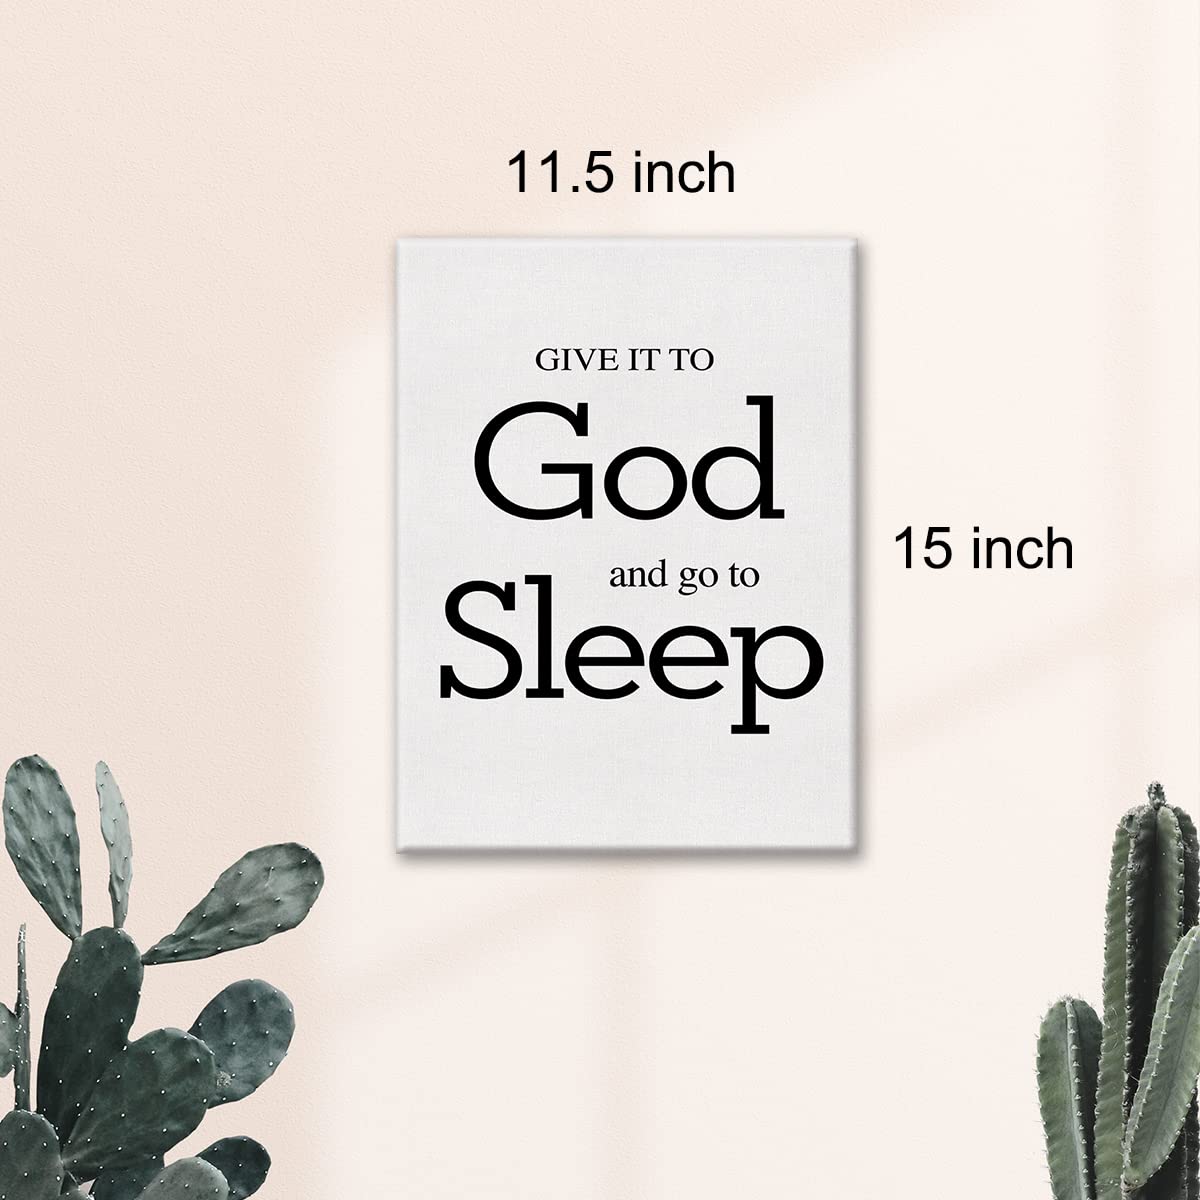 Master Bedroom Sign Wall Art Canvas Print Give It to God and Go to Sleep Poster Framed Motivational Modern Painting for Home Wall & Tabletop Decor